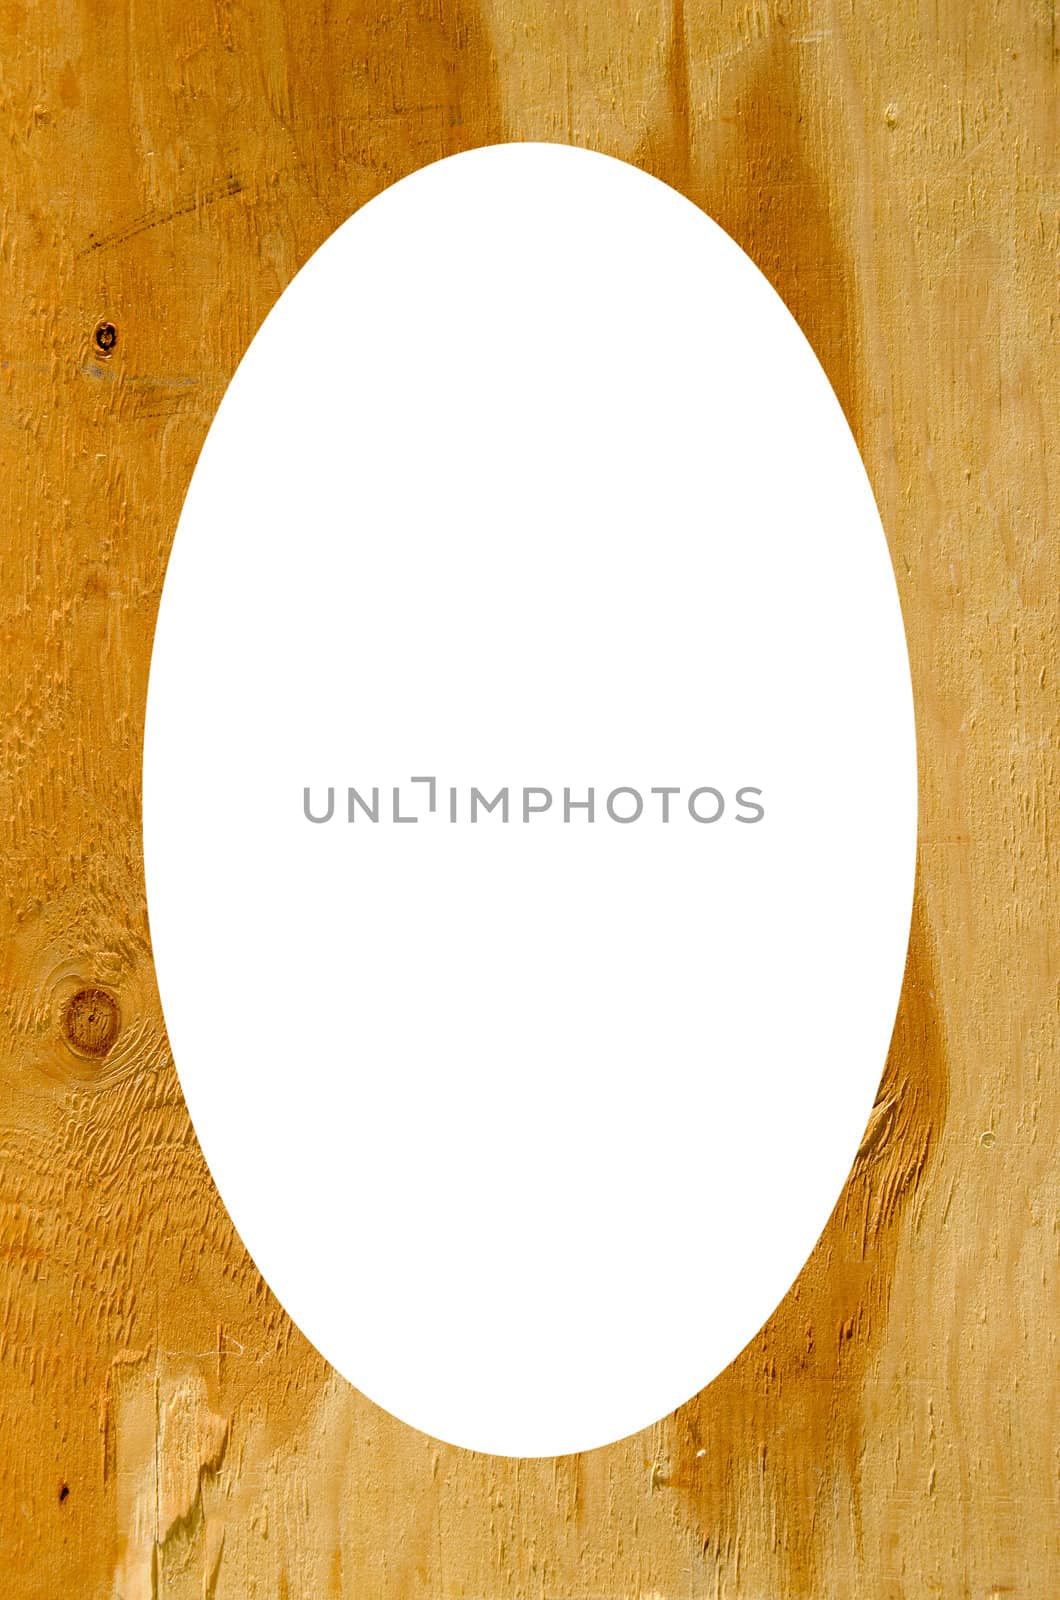 Saturate plank background and white oval in center by sauletas